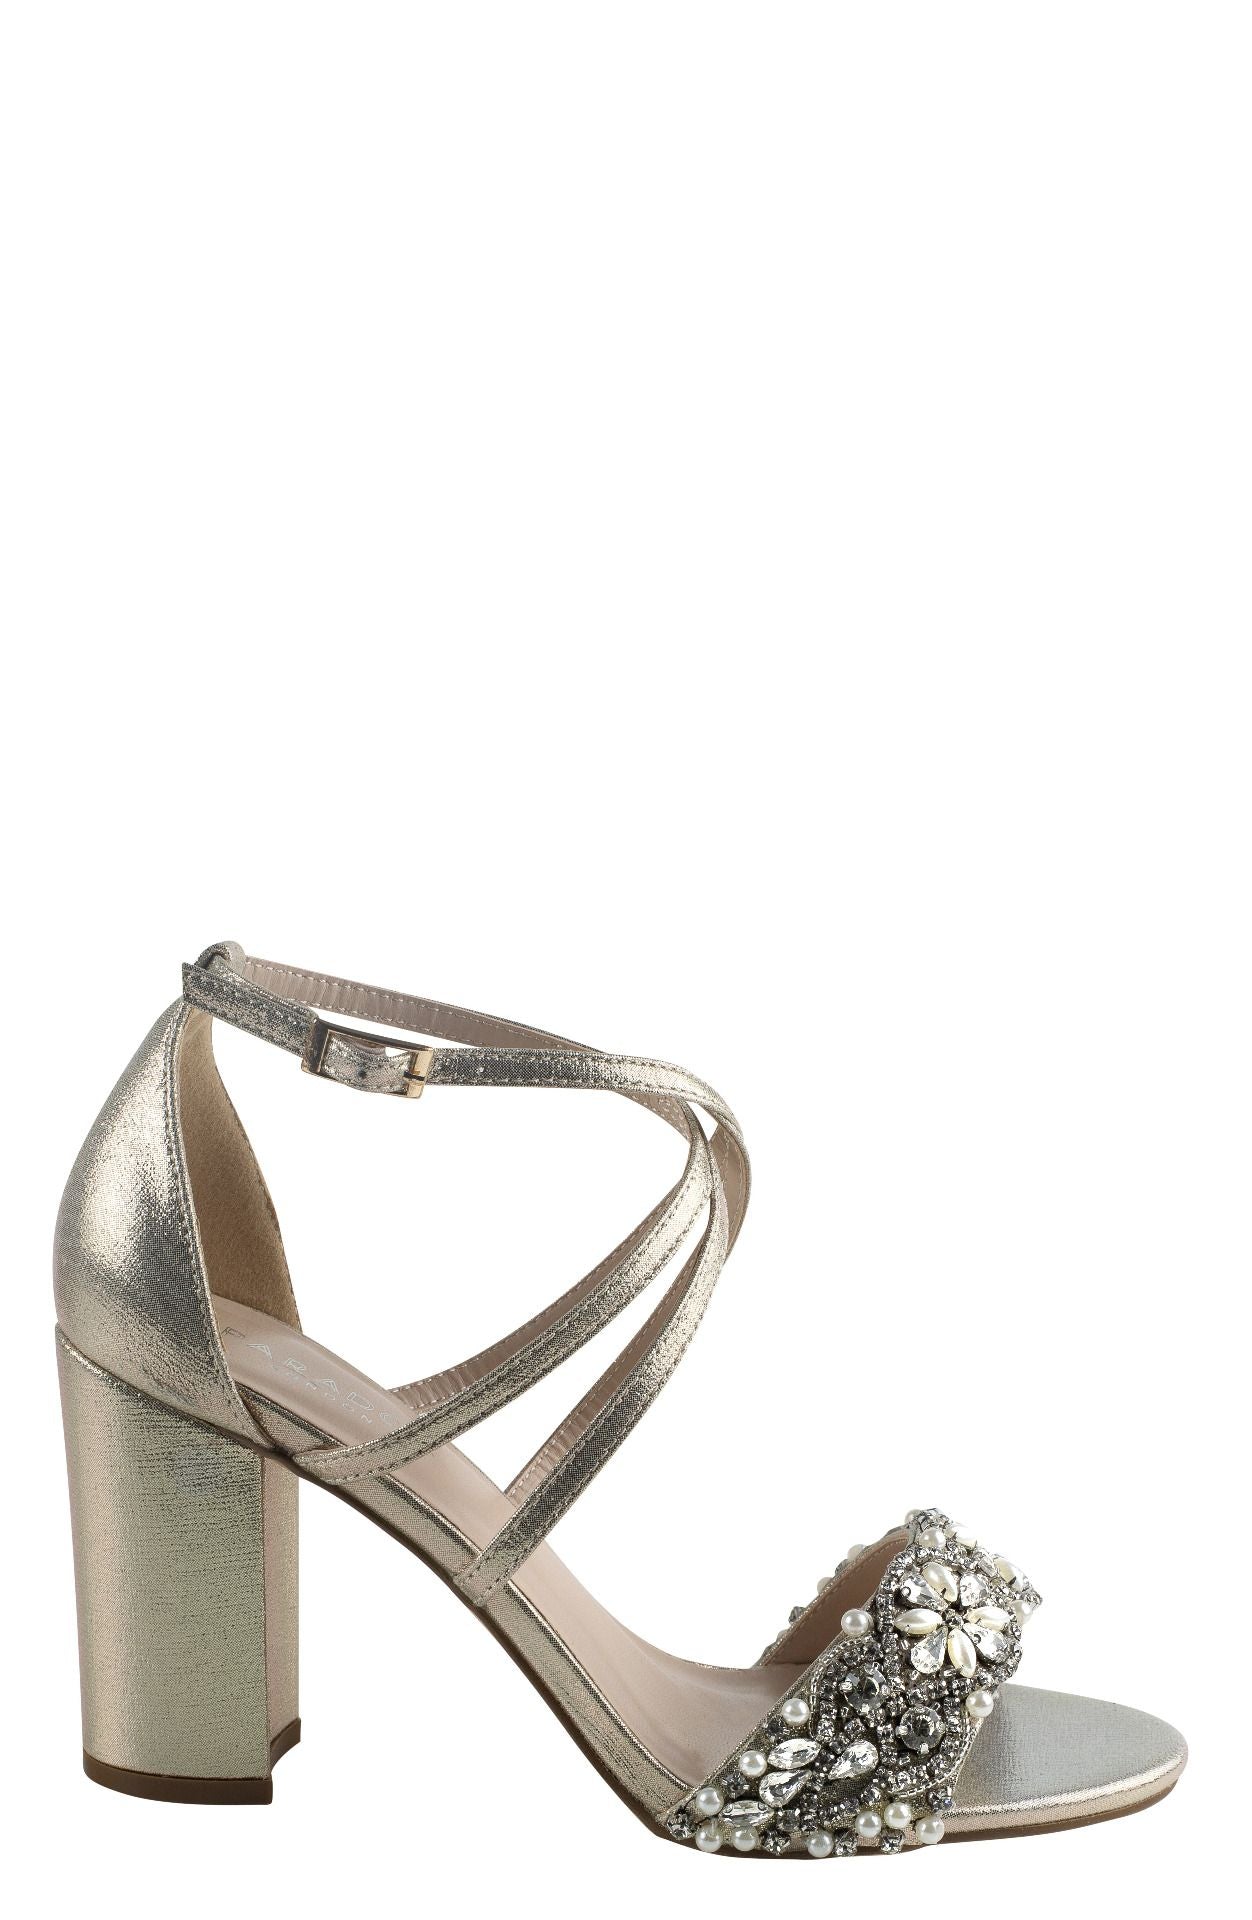 Side view of Champagne  Sandal with 2.75 inch block heel and decrotive strap